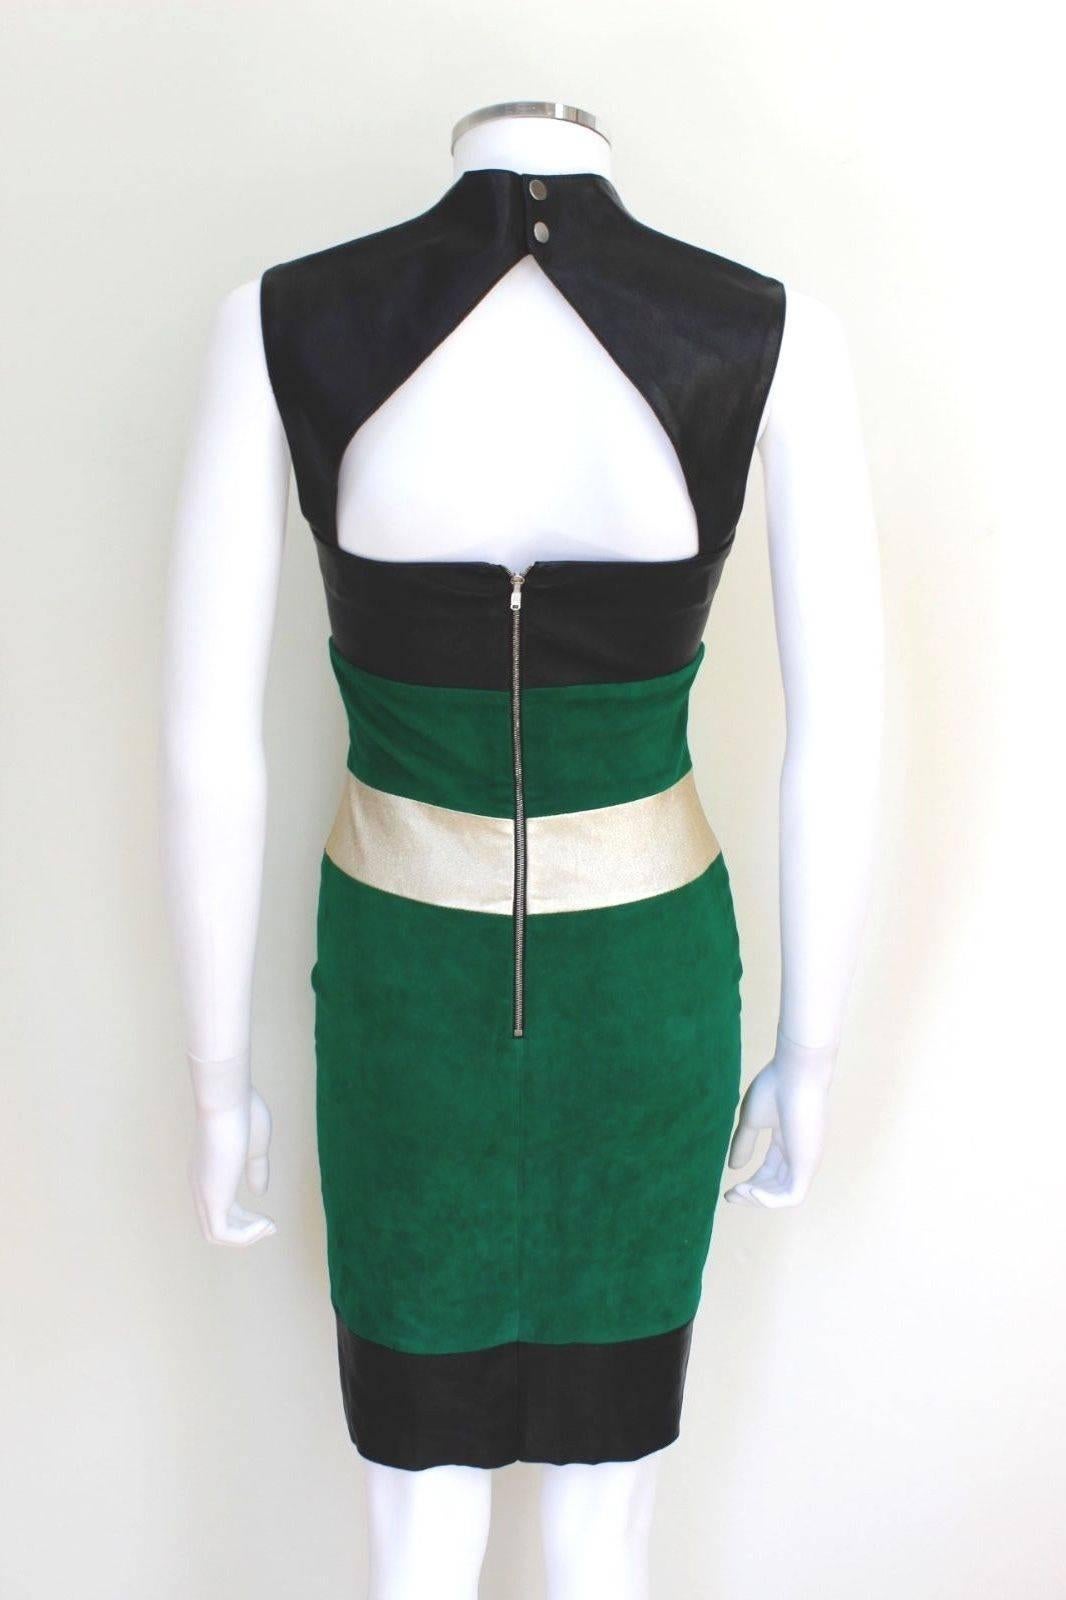 Jitrois Black Green Suede Leather Dress F36 UK 8 
Gorgeous stretch leather dress from Jitrois 
Black leather bodice and hem, green suede with gold panel to the waist 
Unlined, with zip fastening 
Length 36 inches, chest 16 inches across, waist 12